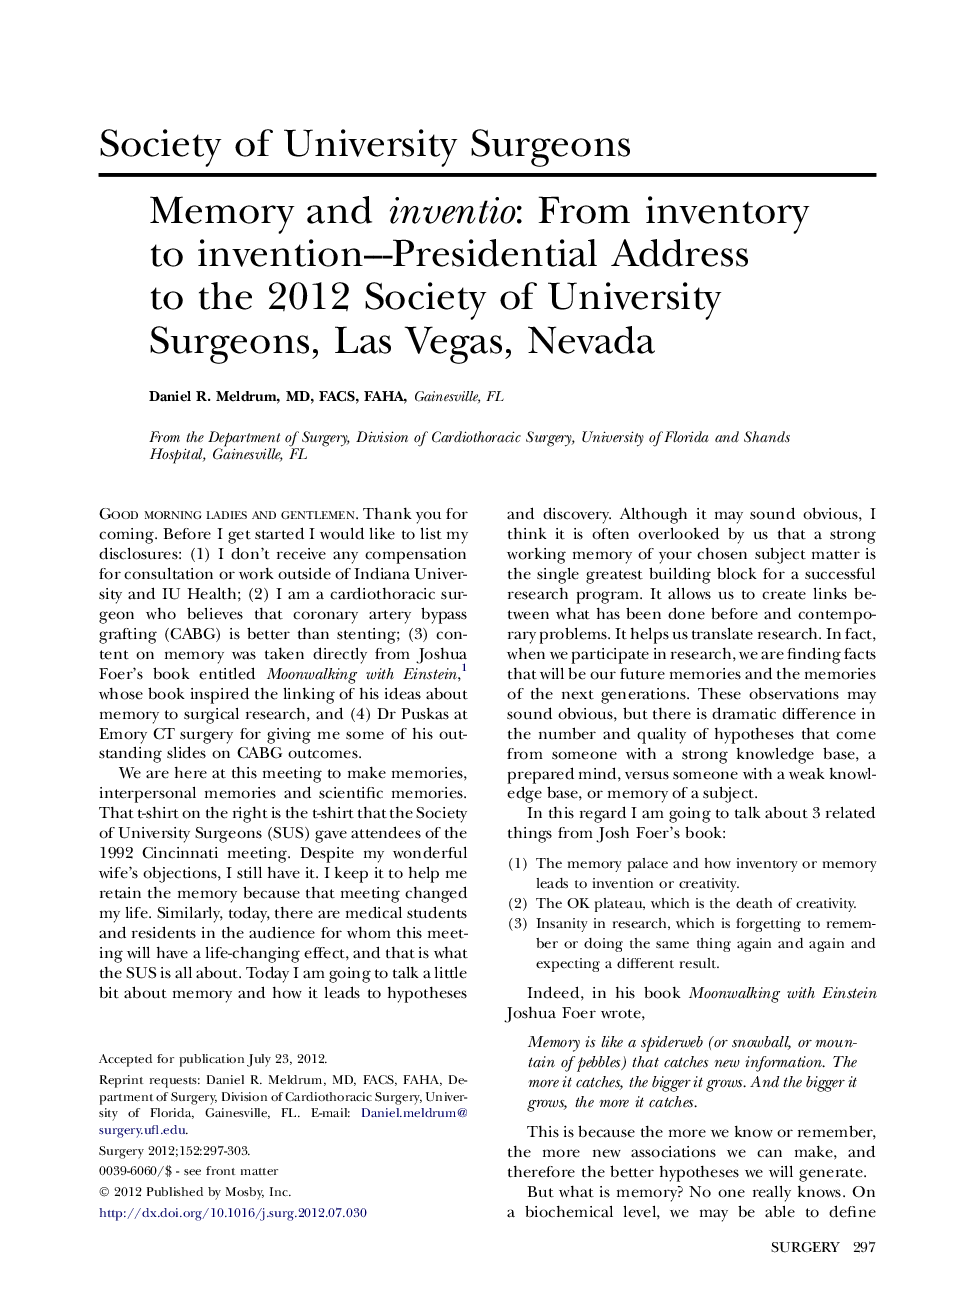 Memory and inventio: From inventory to invention-Presidential Address to the 2012 Society of University Surgeons, Las Vegas, Nevada